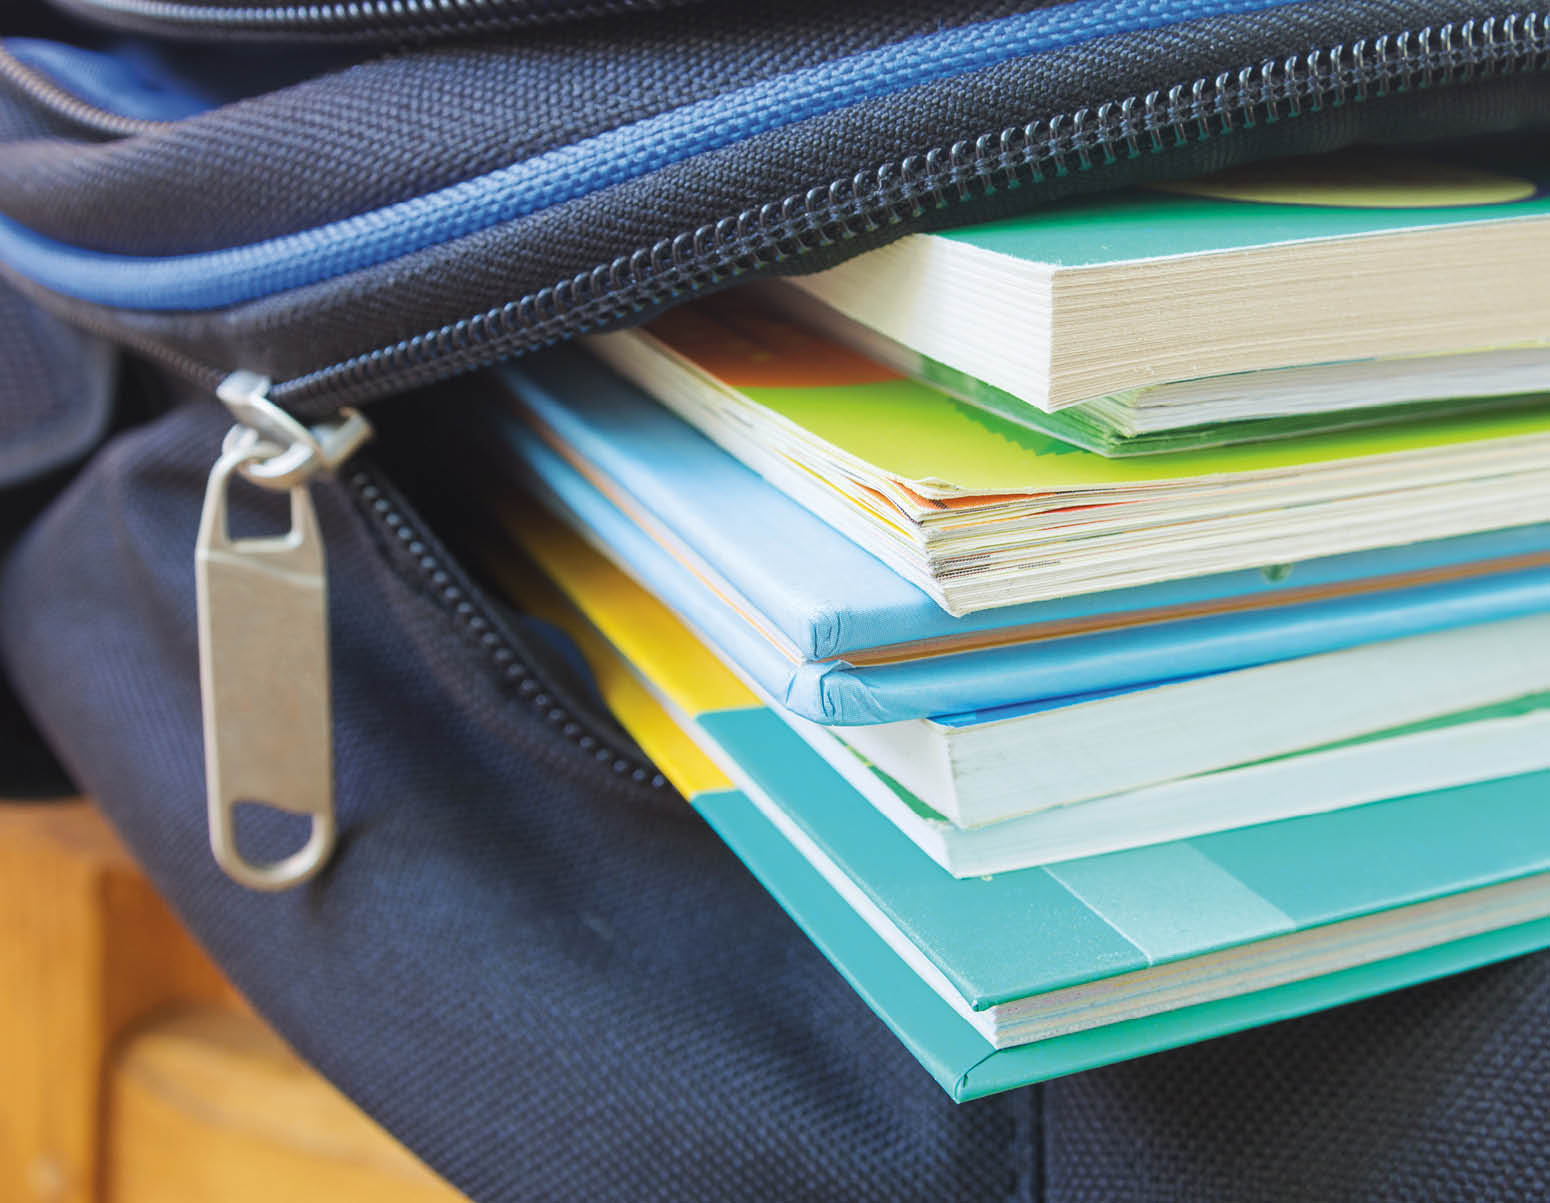 close up of yellow, green, and blue books sticking out of a blue backpack